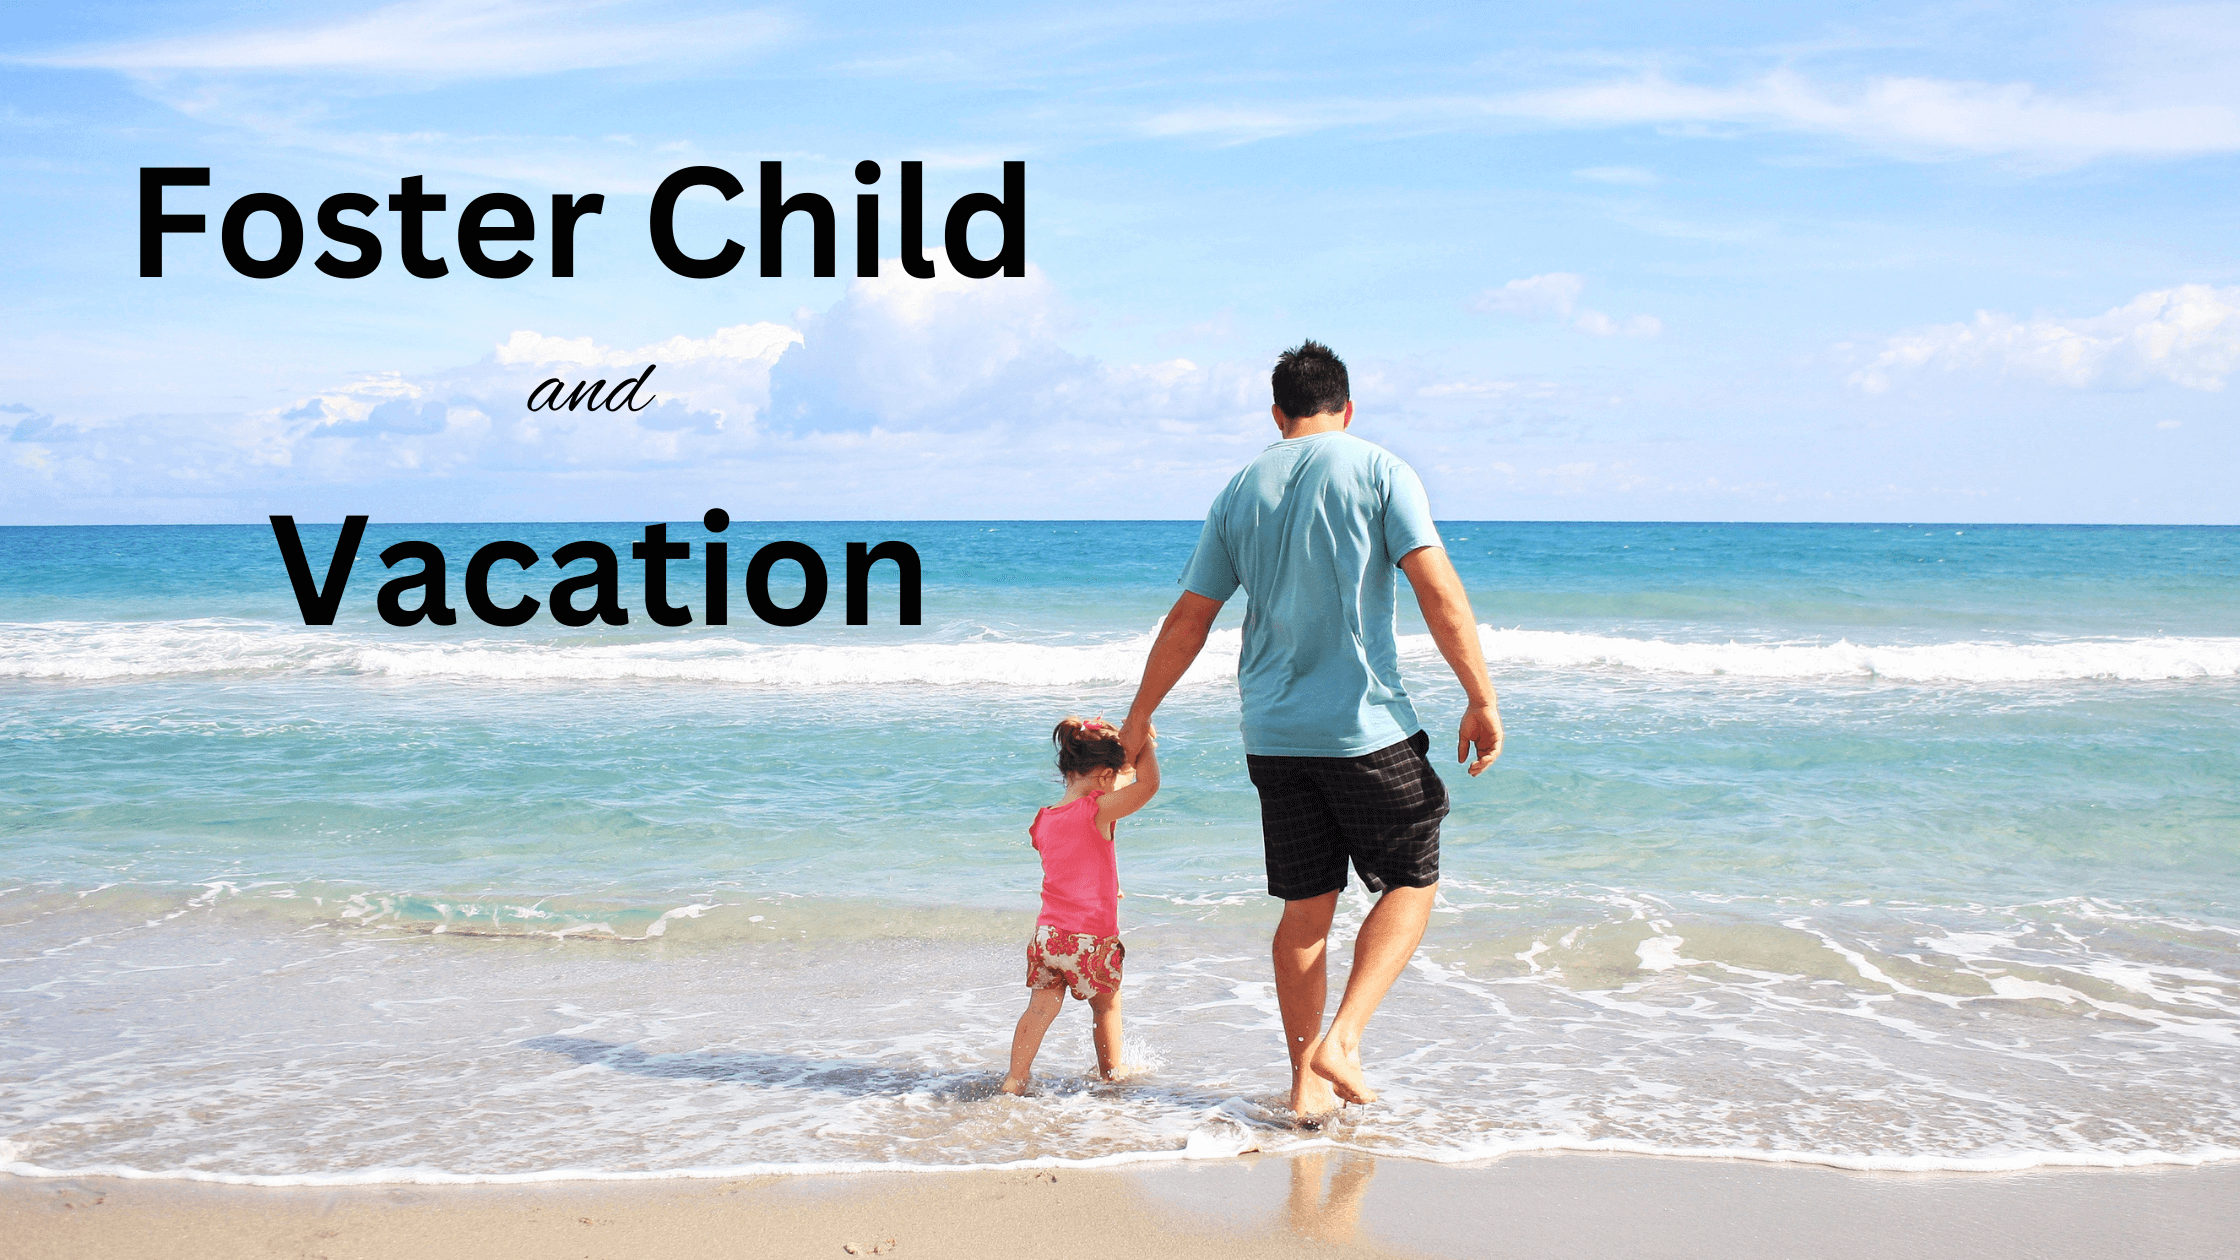 Can You Take Foster Child on Vacation